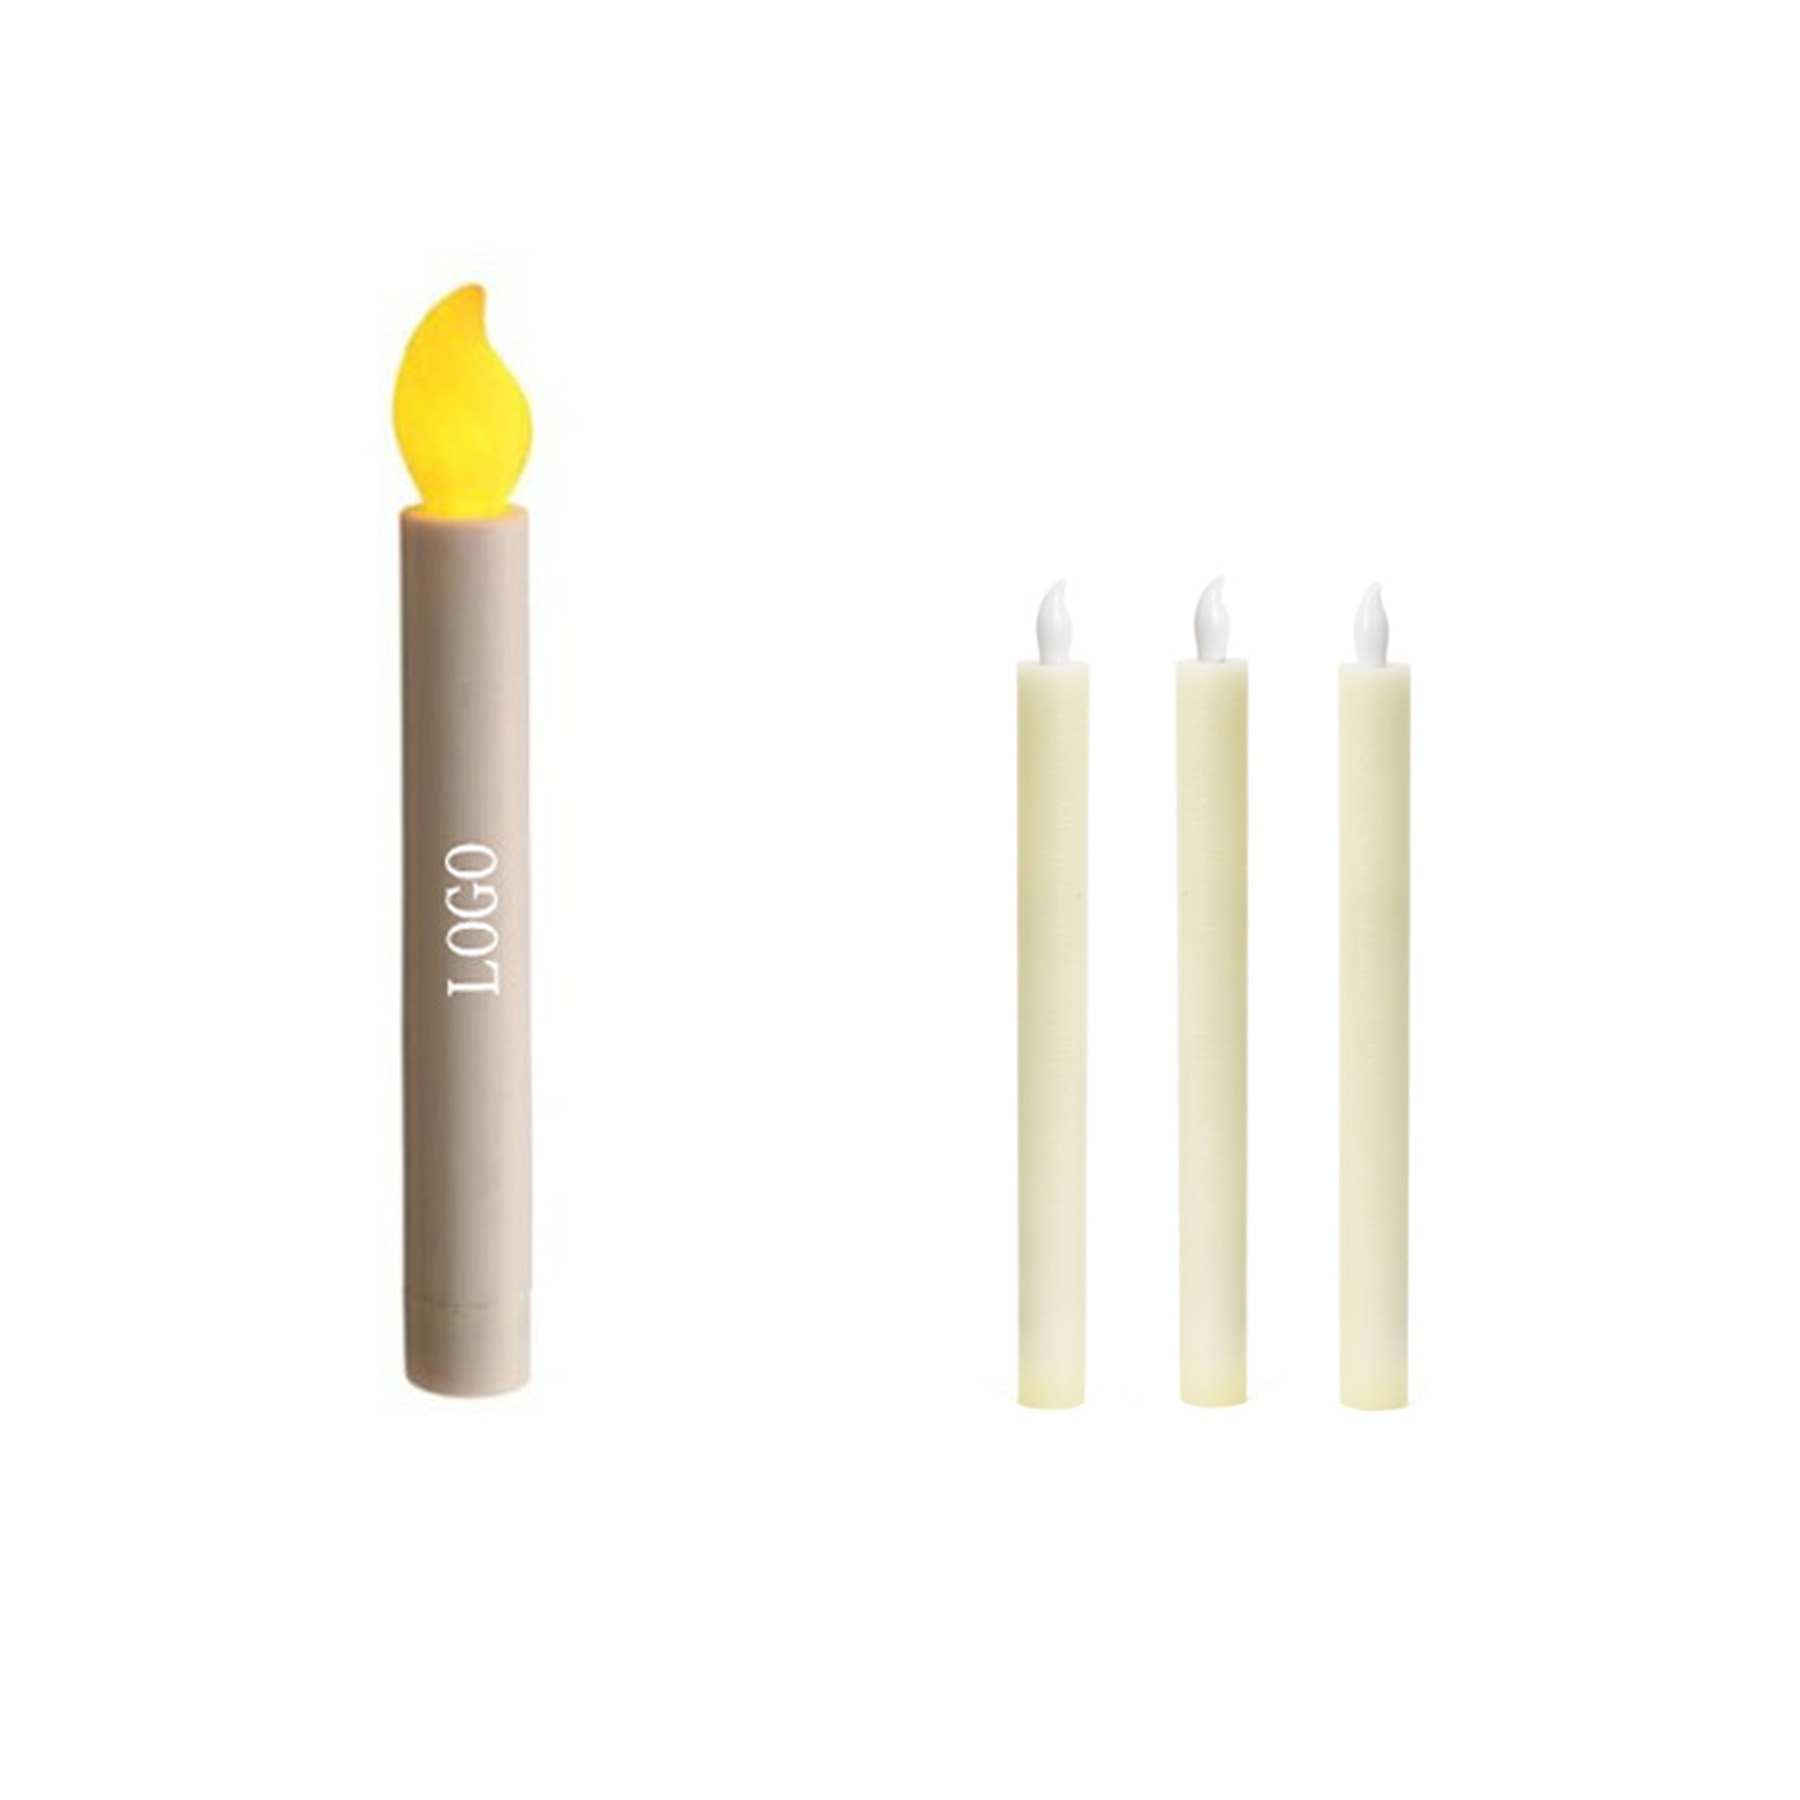 Battery Candlestickes Flameless Taper Candles Warm White LEDs